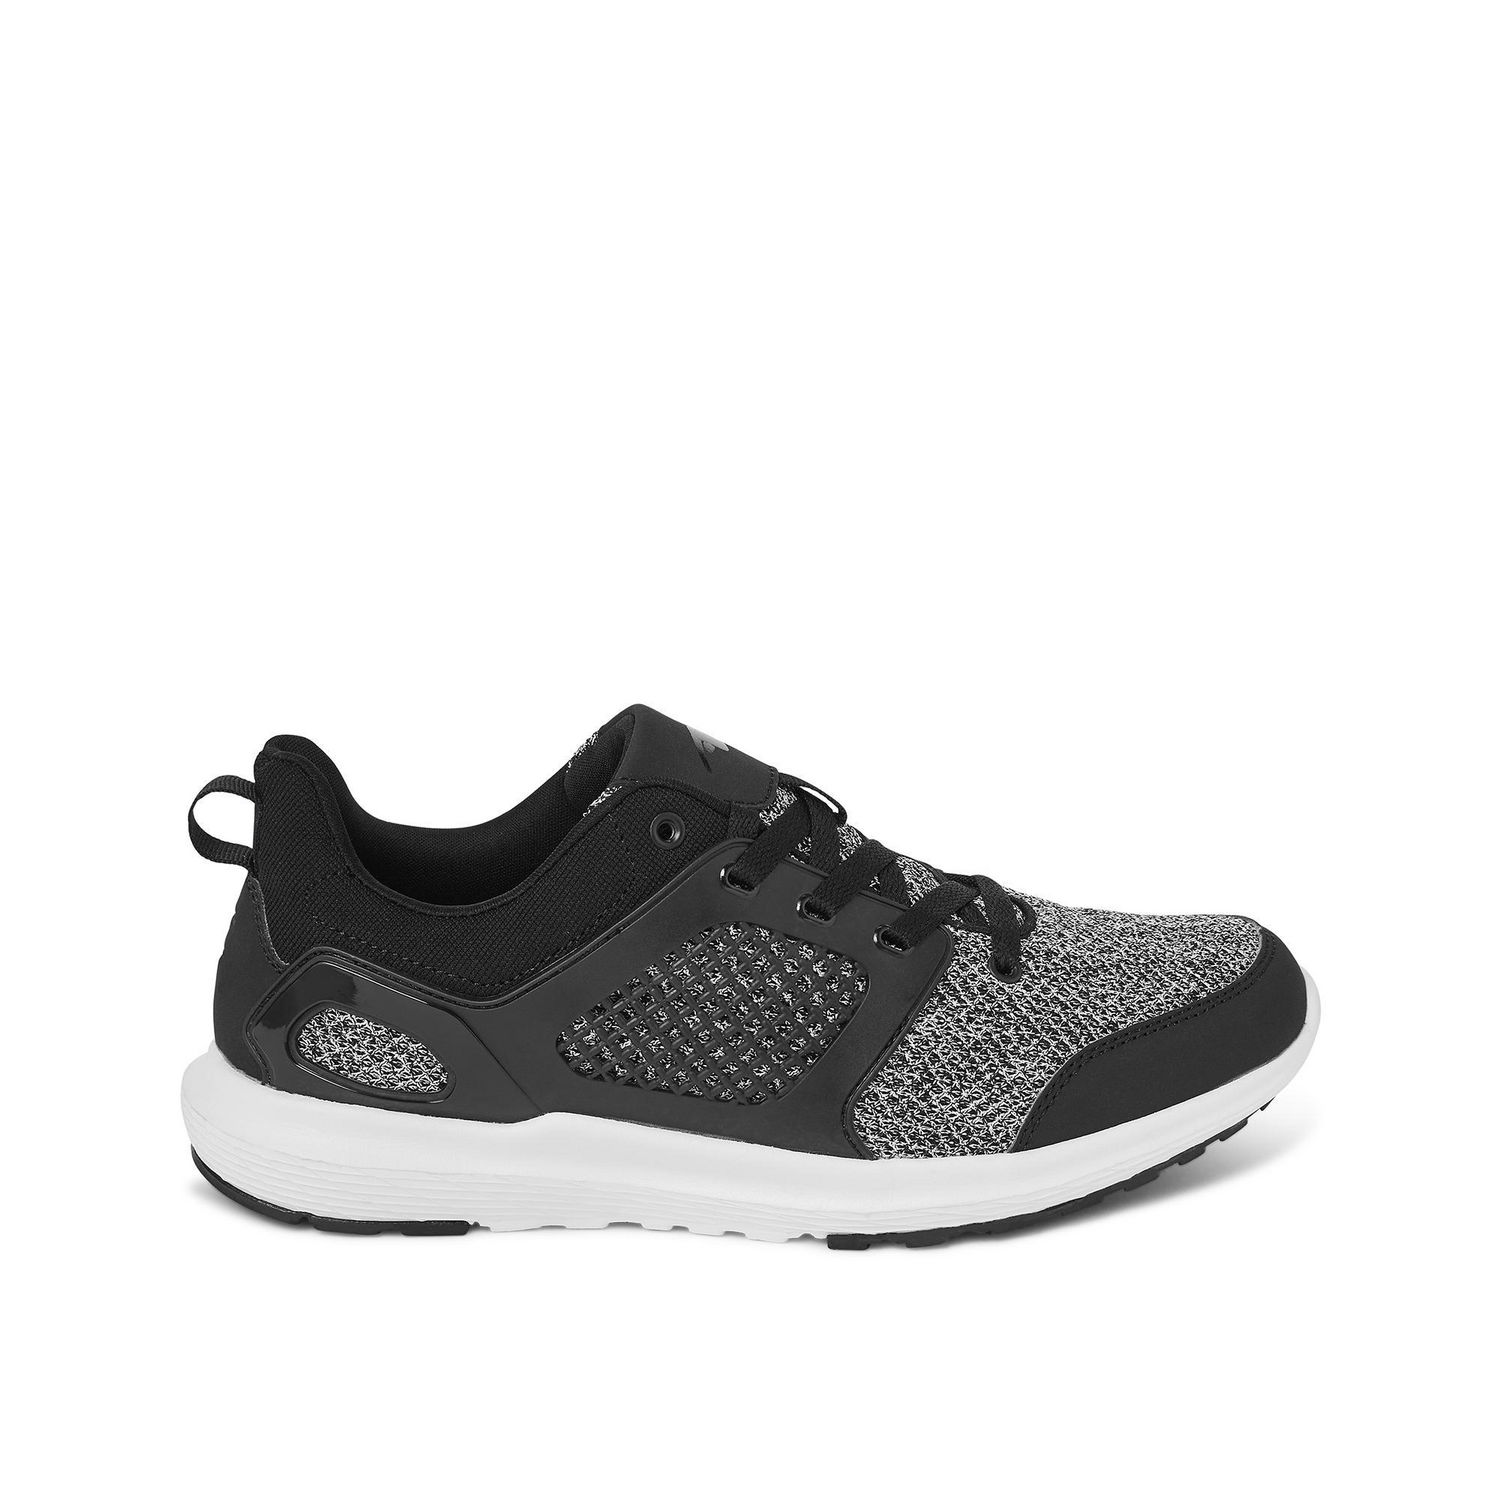 Athletic Works Men's Cage Sneakers | Walmart Canada